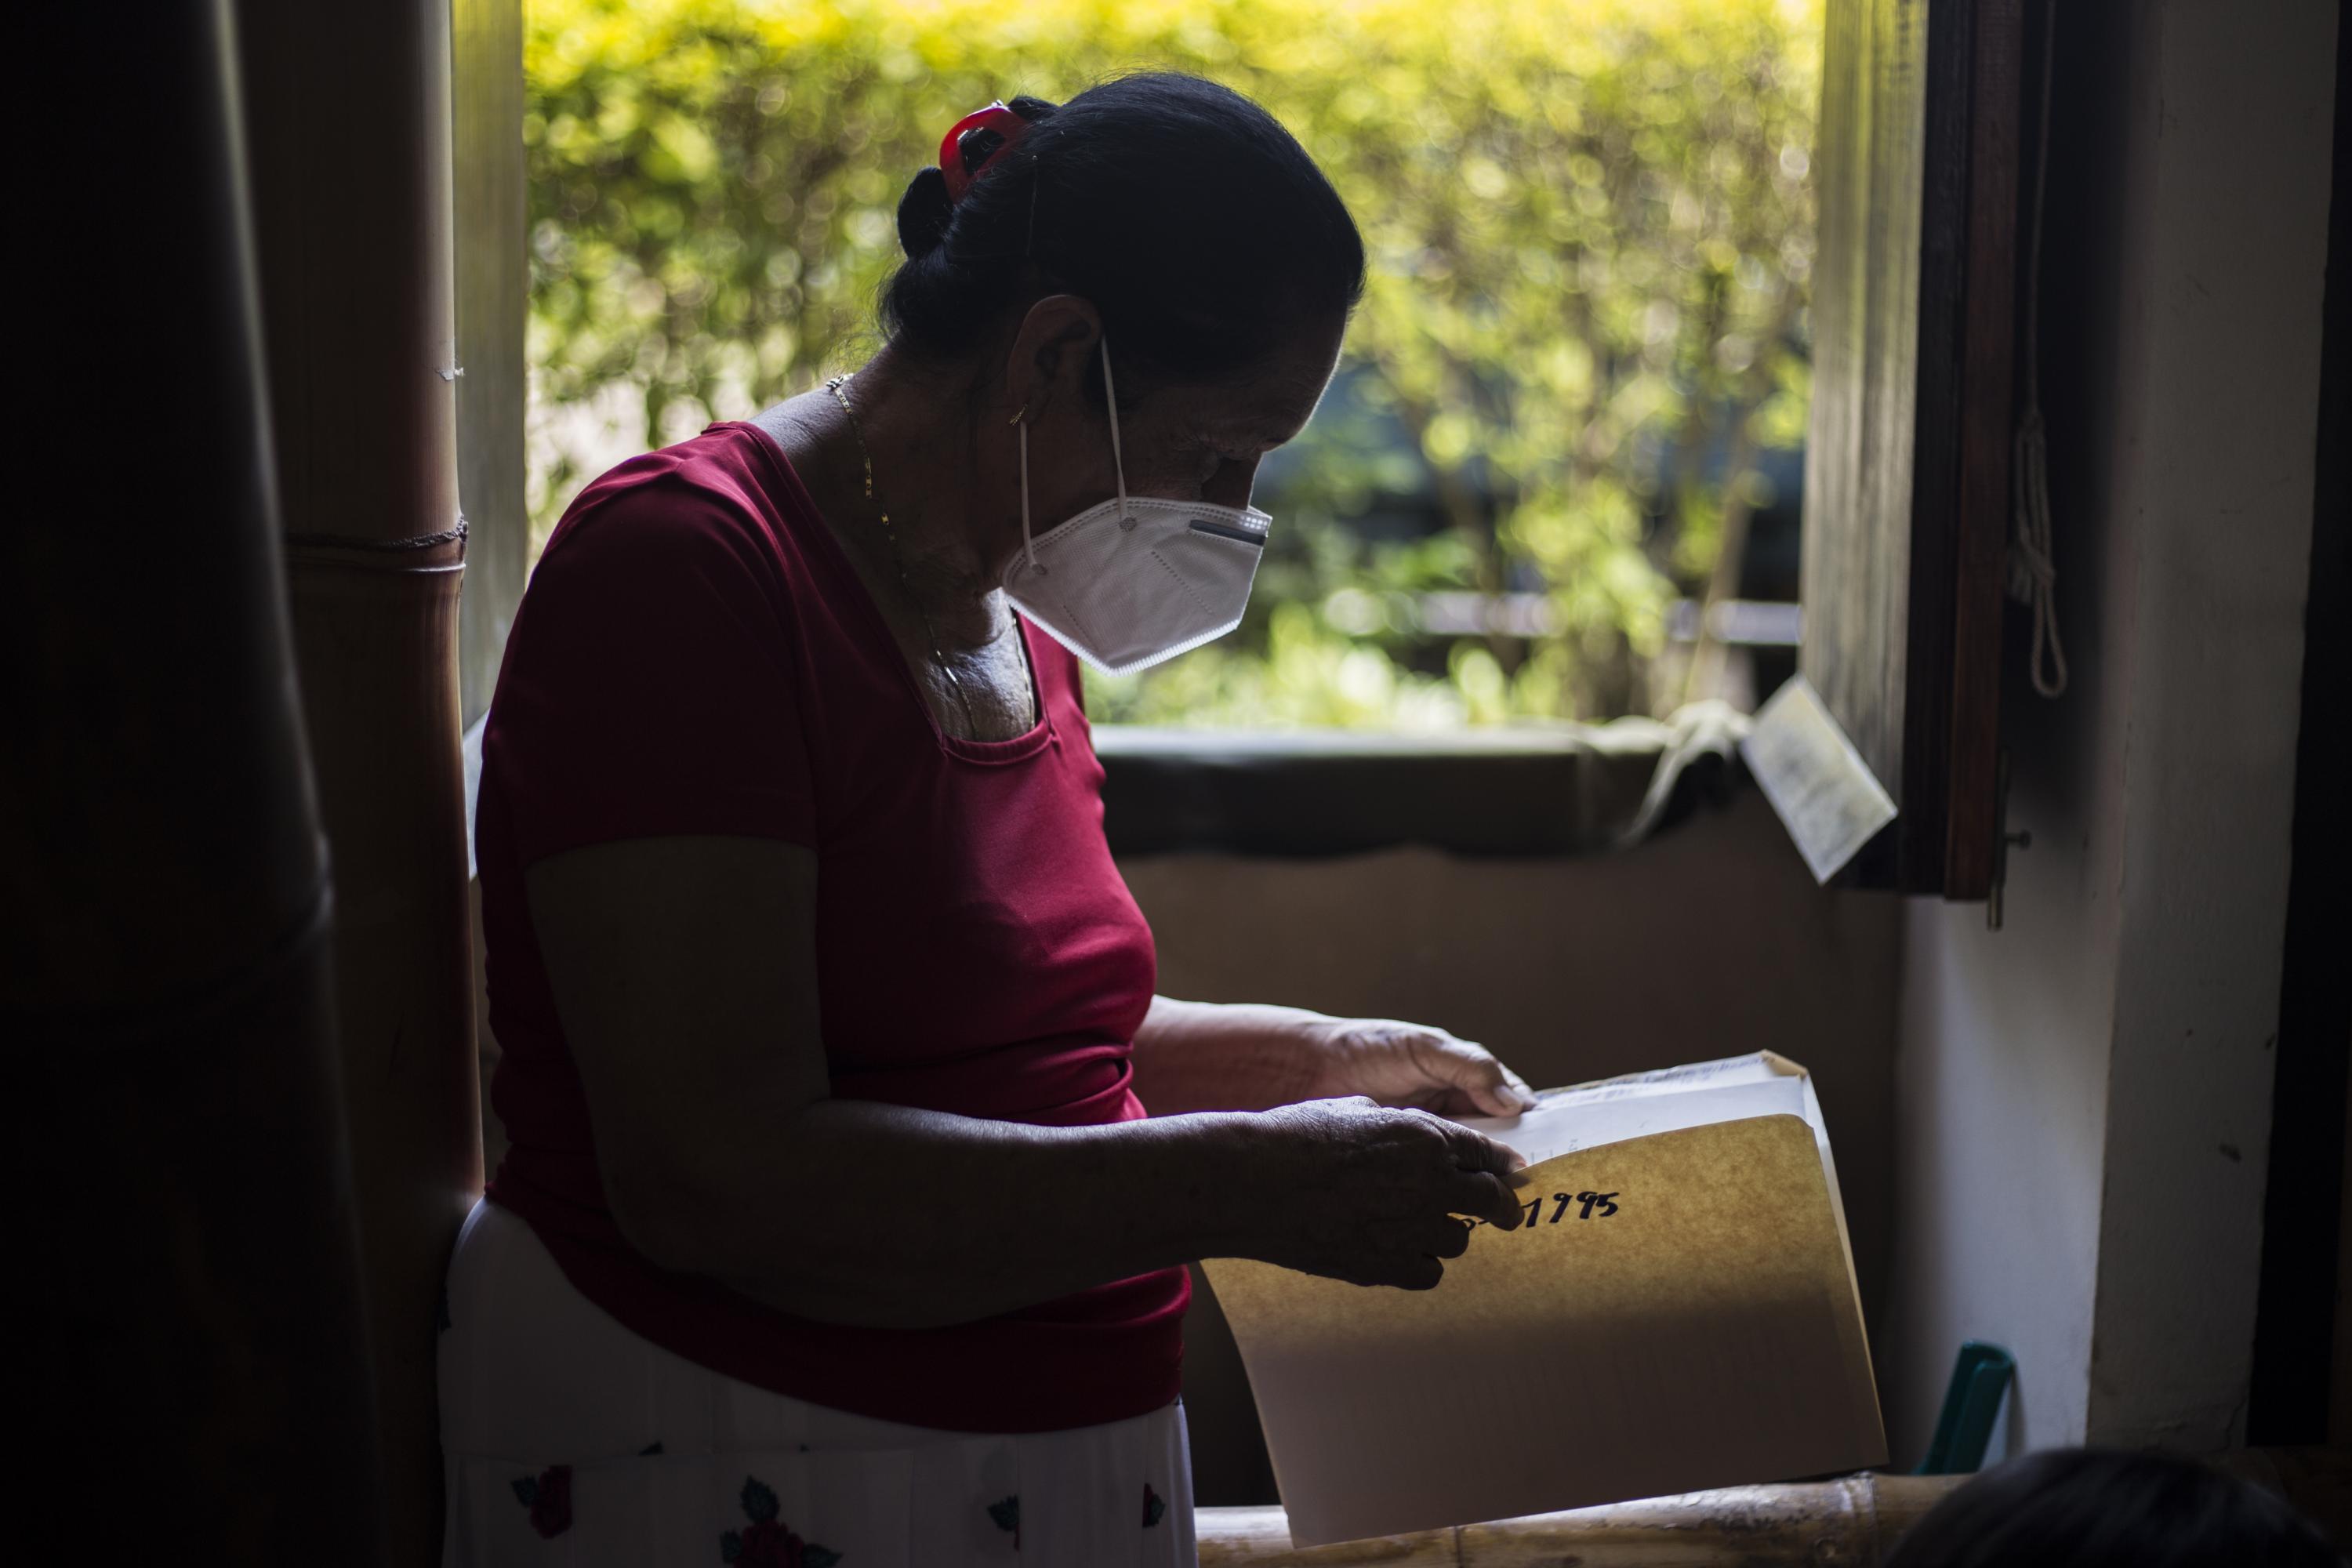 Lucía Beltrán’s work in Suchitoto has been so thorough that, out of the 1200 cases of violence against women opened by her office, only 5 or 6 have not received a ruling. Photo: Víctor Peña/El Faro.